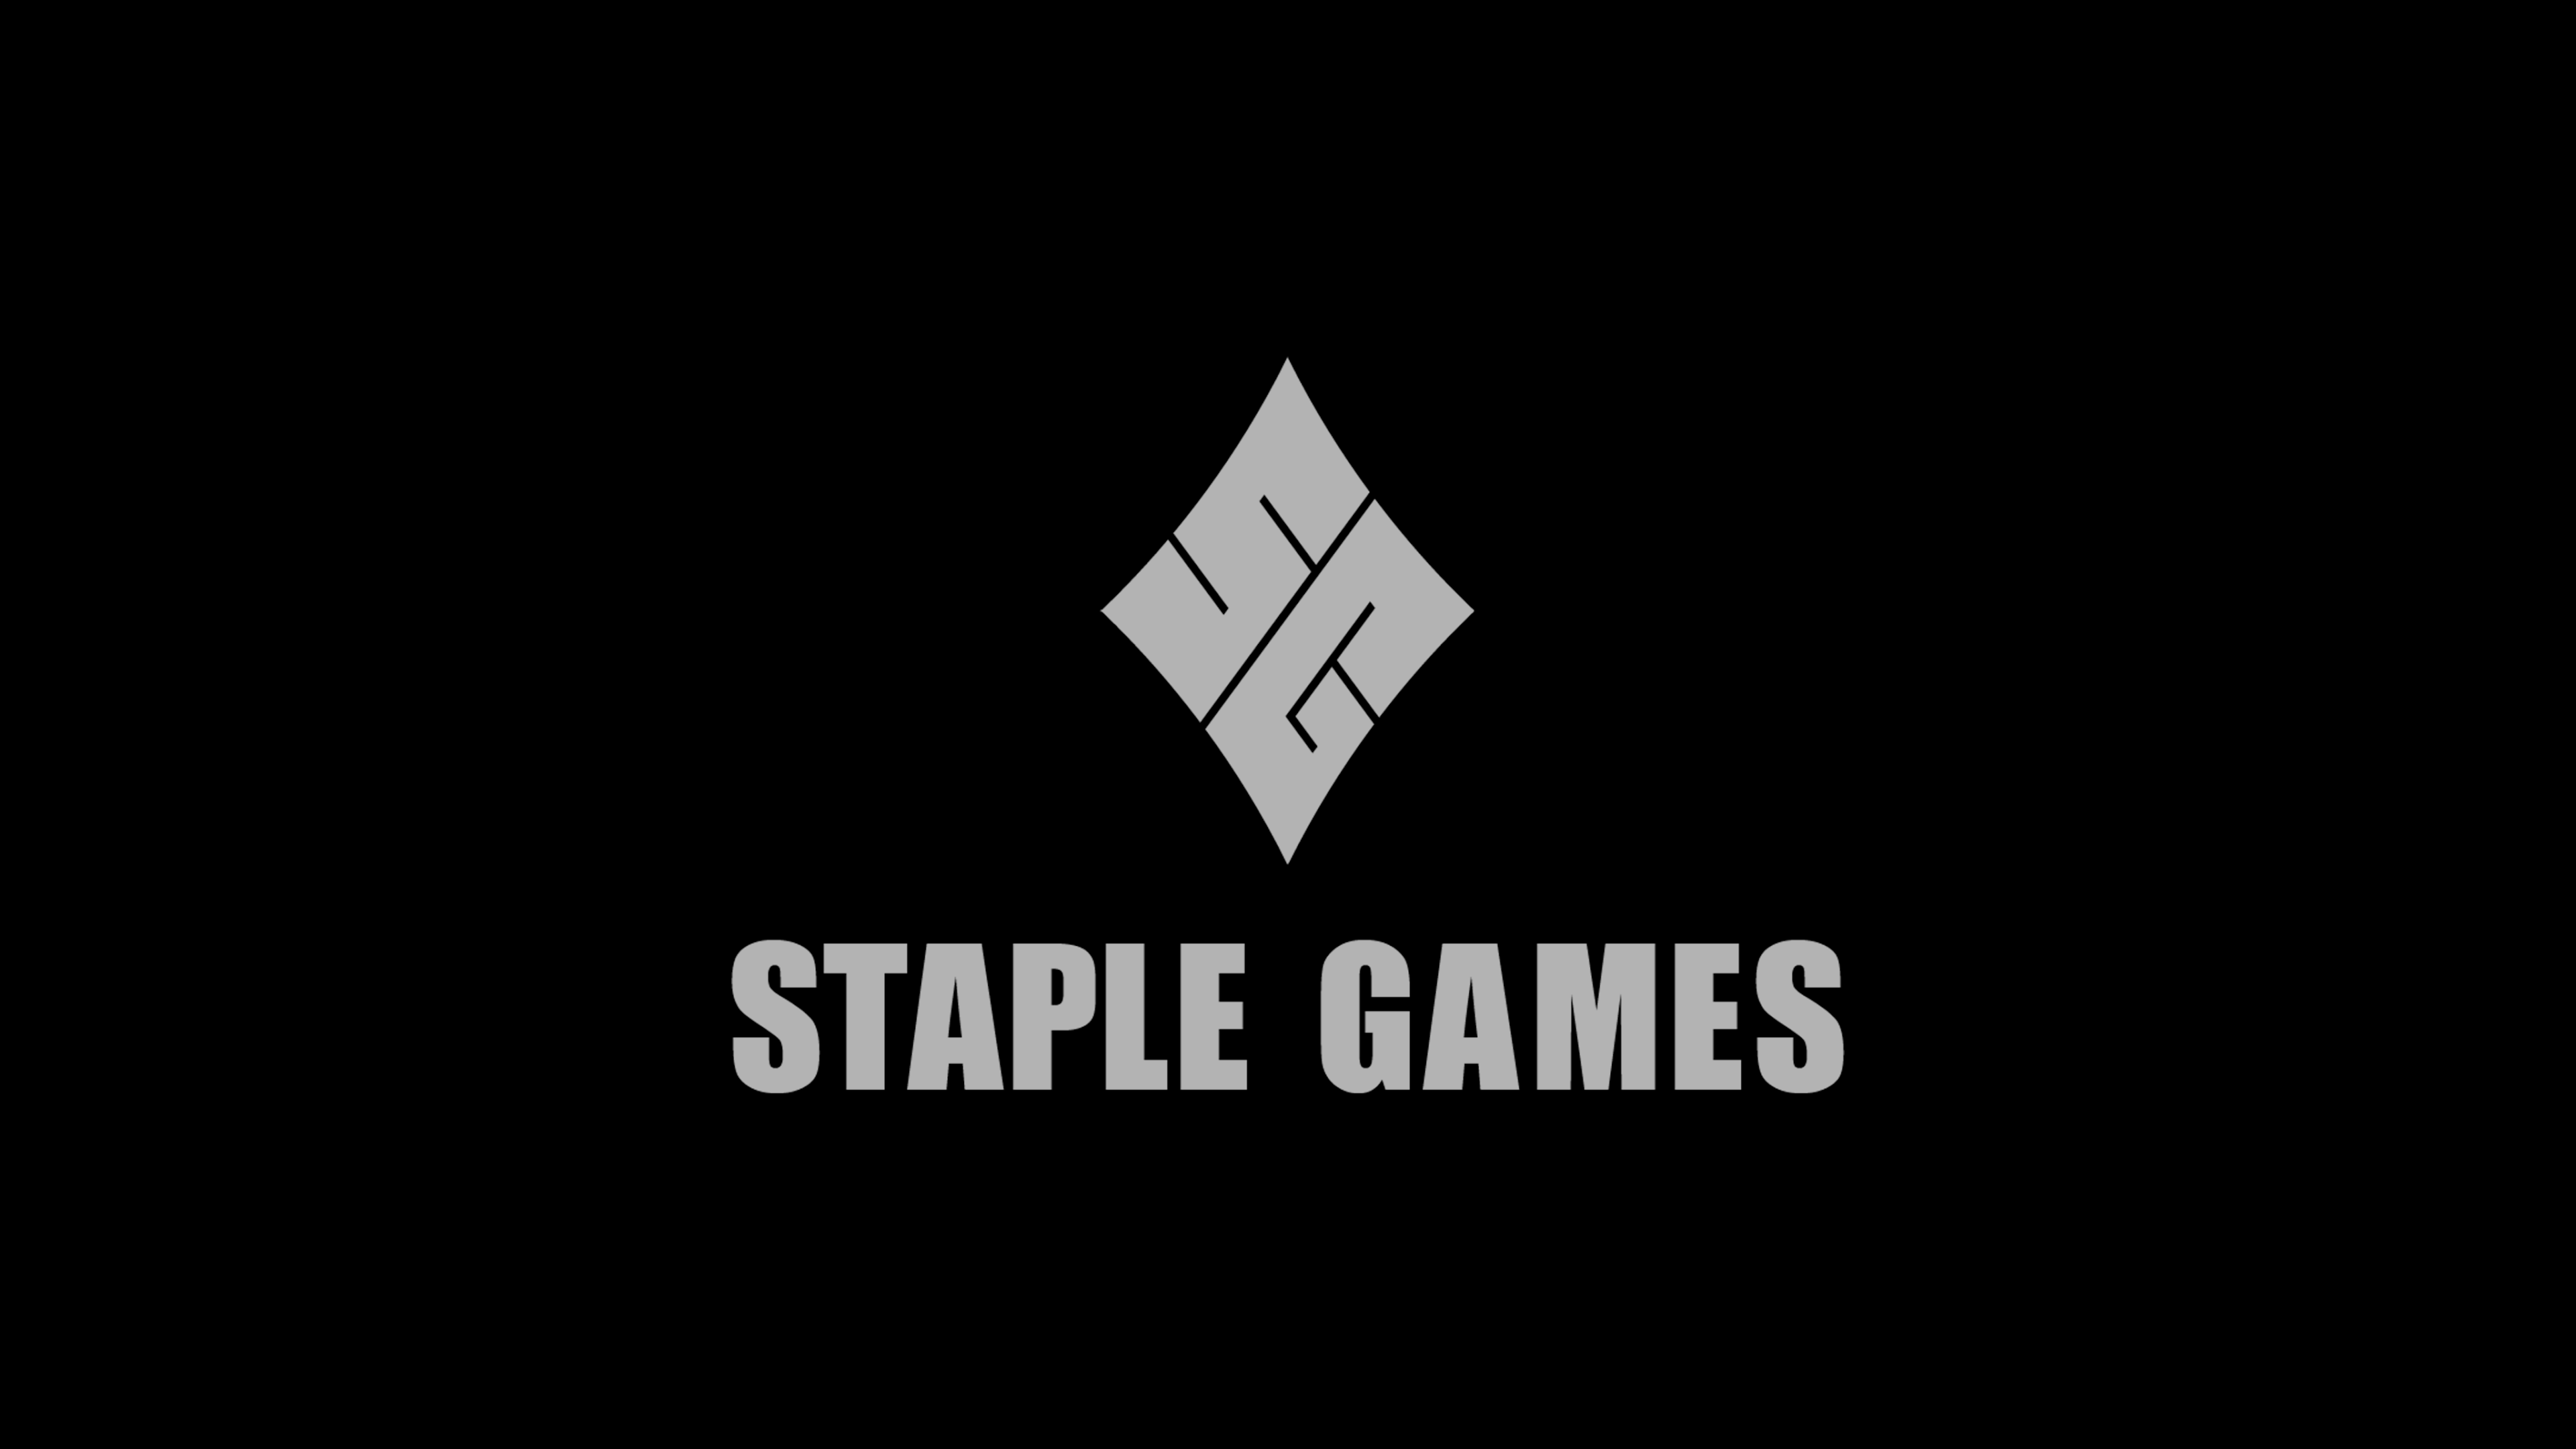 Android Apps by Staple Games on Google Play